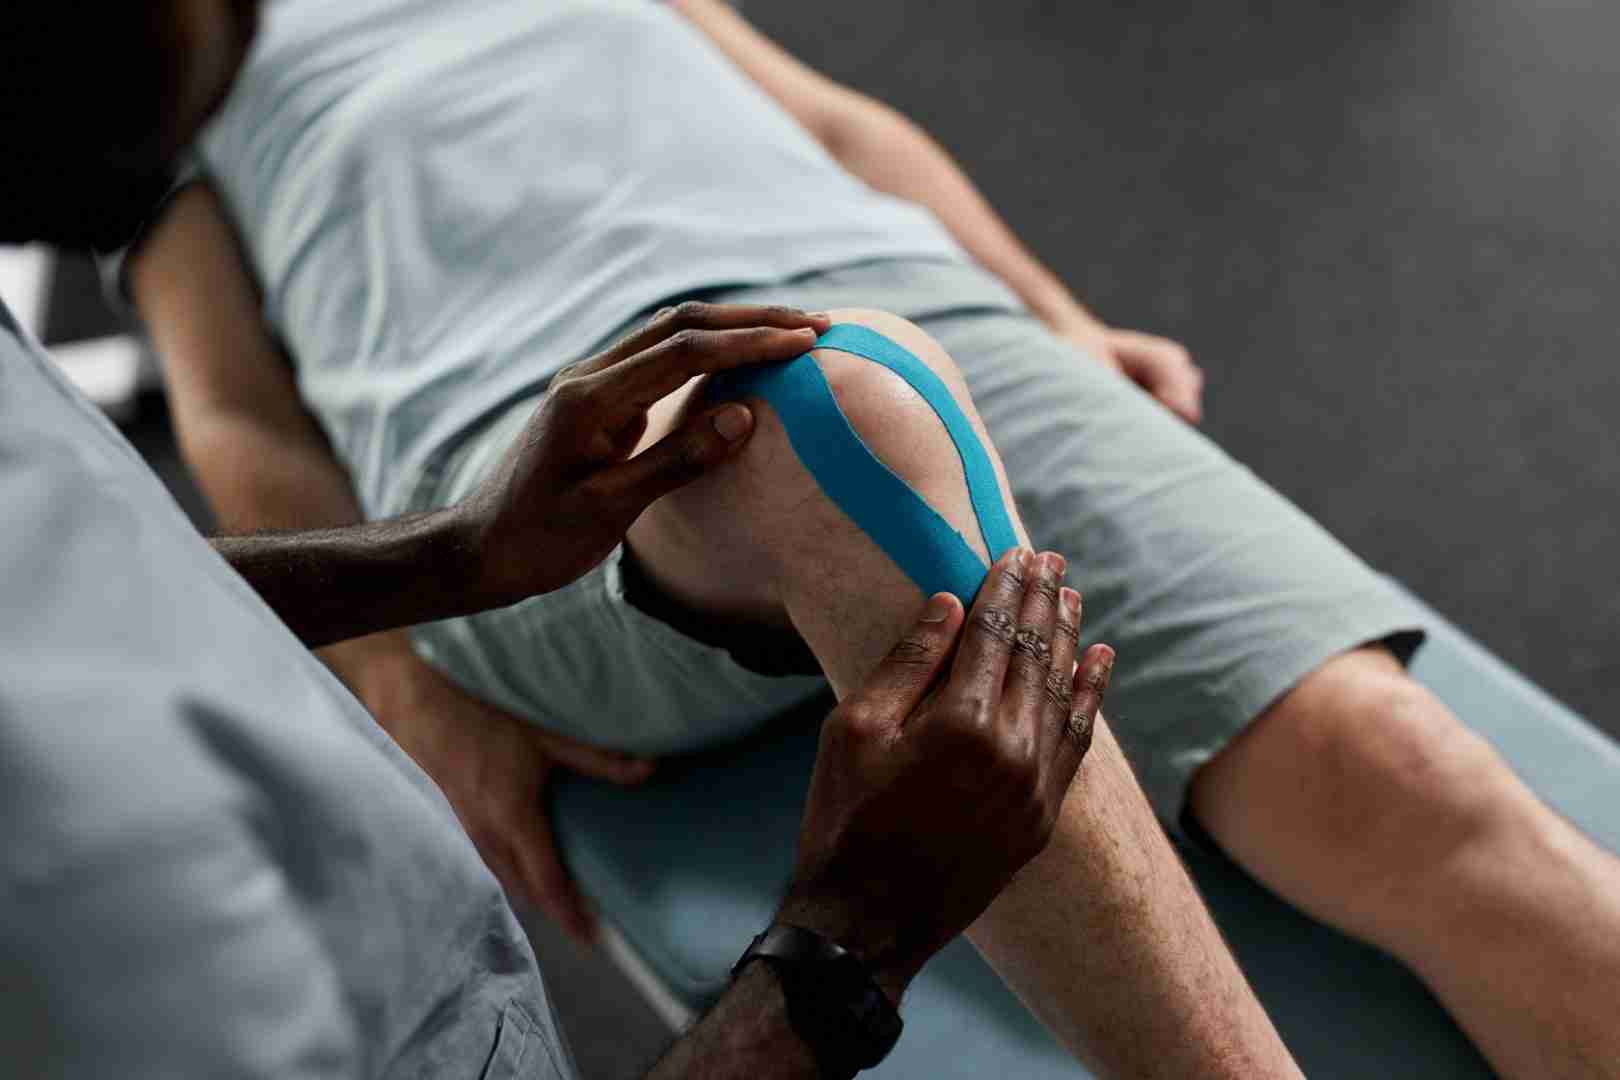 A person is lying on a treatment table at Austin Manual Therapy Associates while another individual applies blue kinesiology tape to their knee. The person receiving the treatment is wearing light shorts and a matching shirt, in what appears to be a clinical or therapeutic setting.